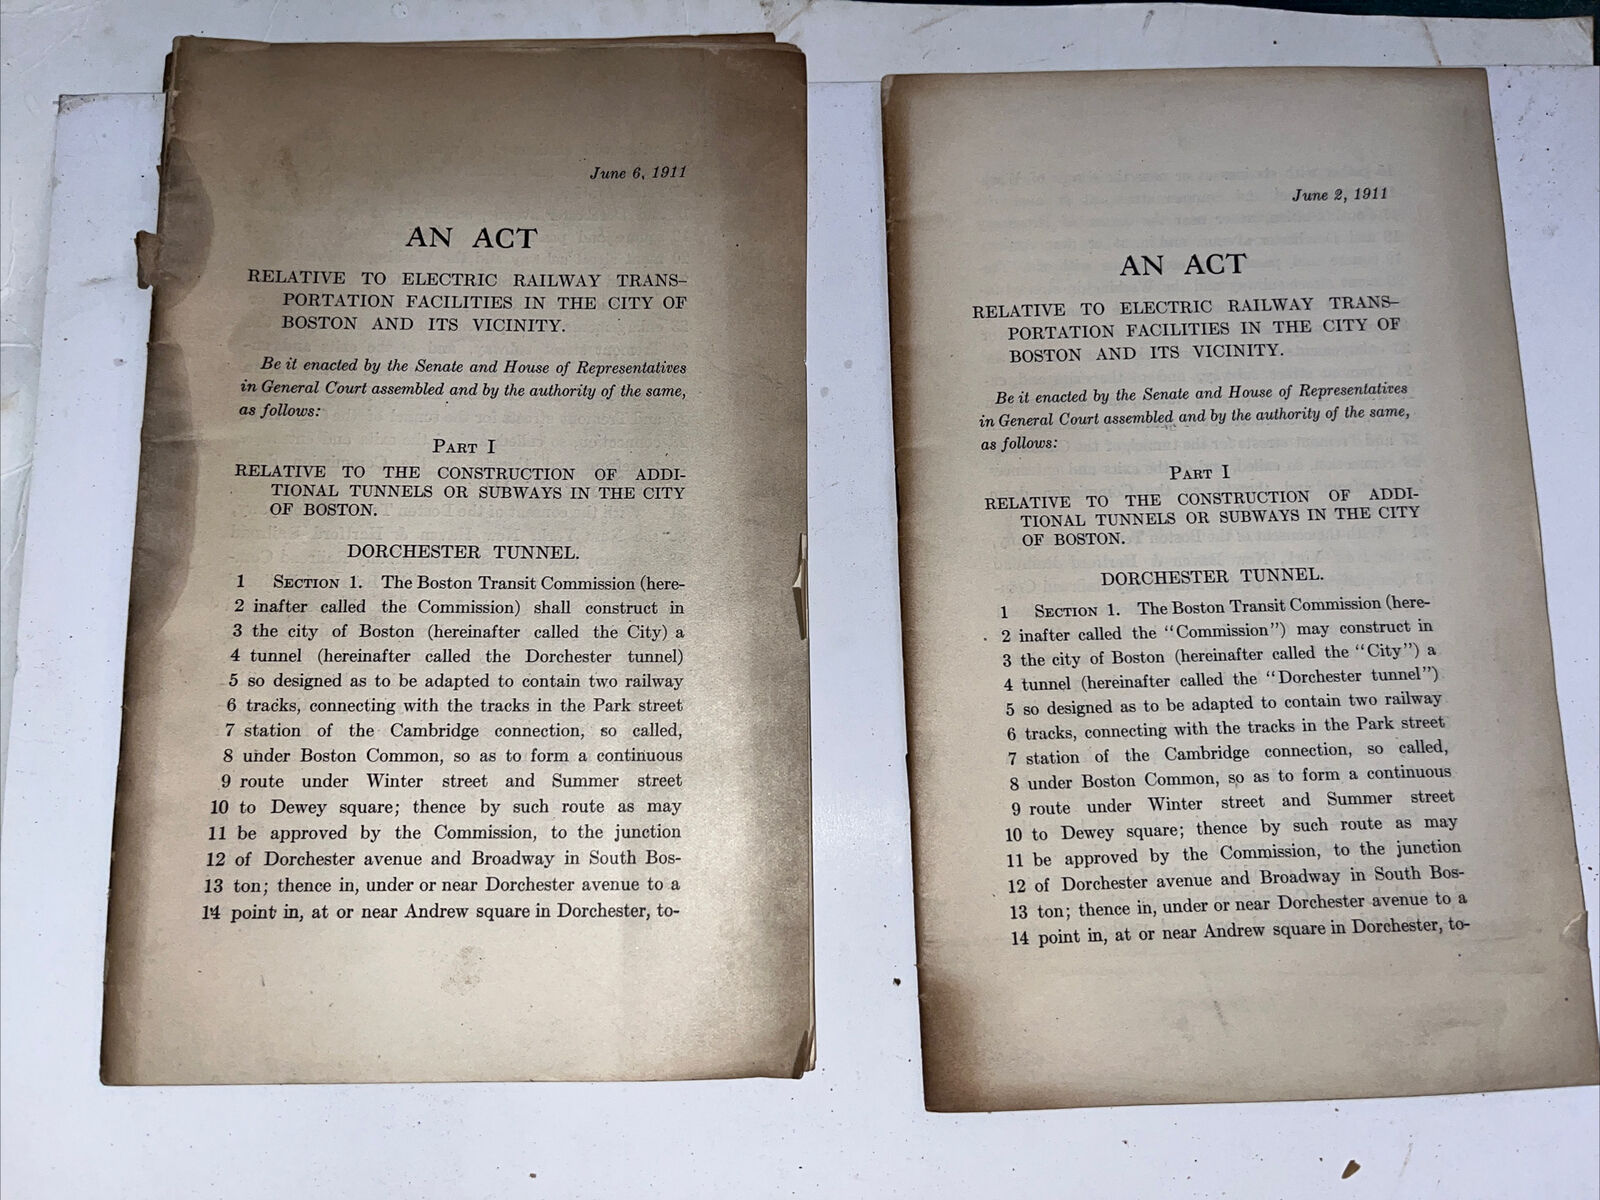 Antique June 2 & 6 1911 Drafts: Act on Electric Railway Transportation in Boston